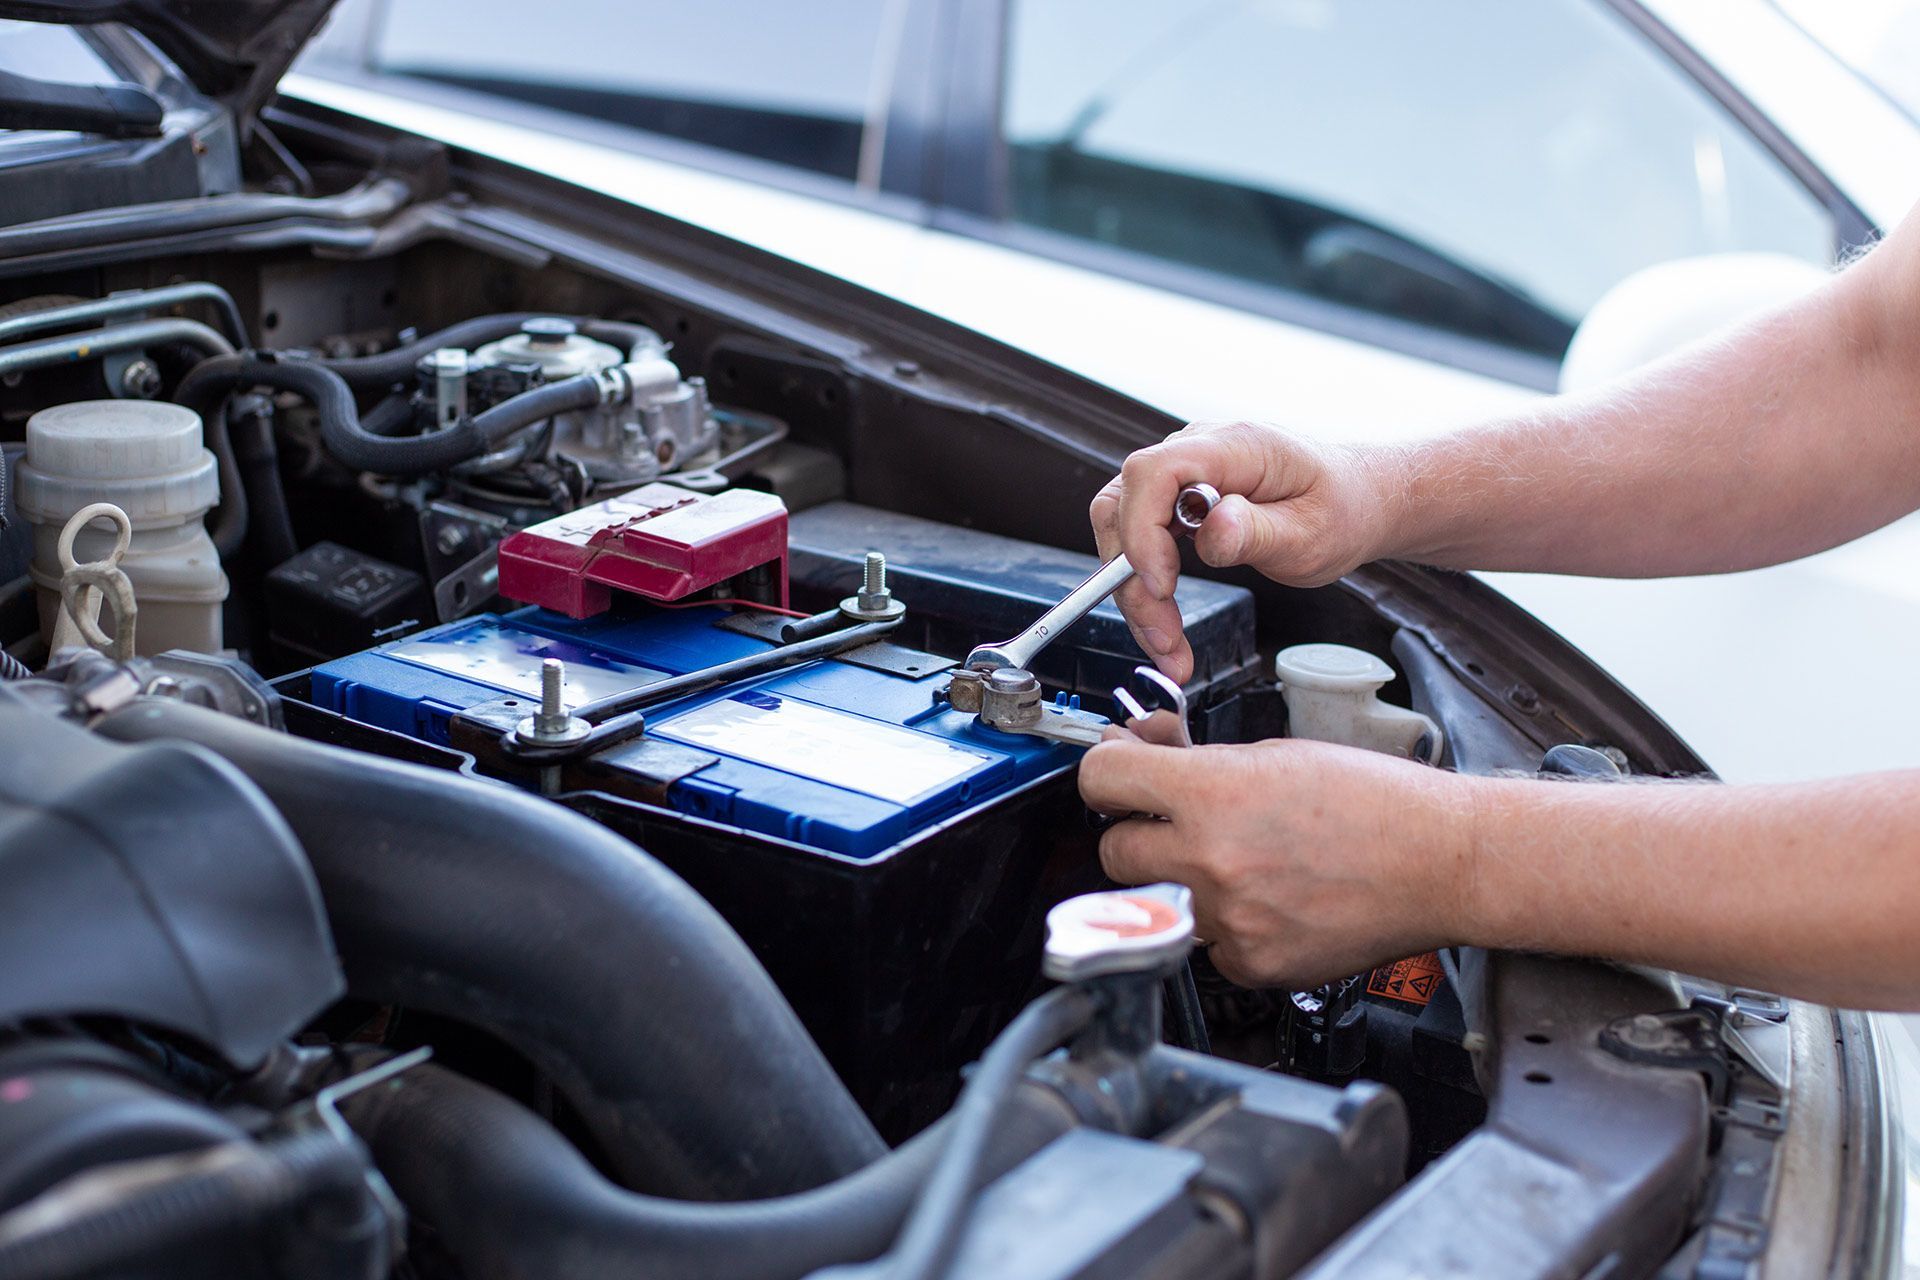 Troubleshooting The Car Battery